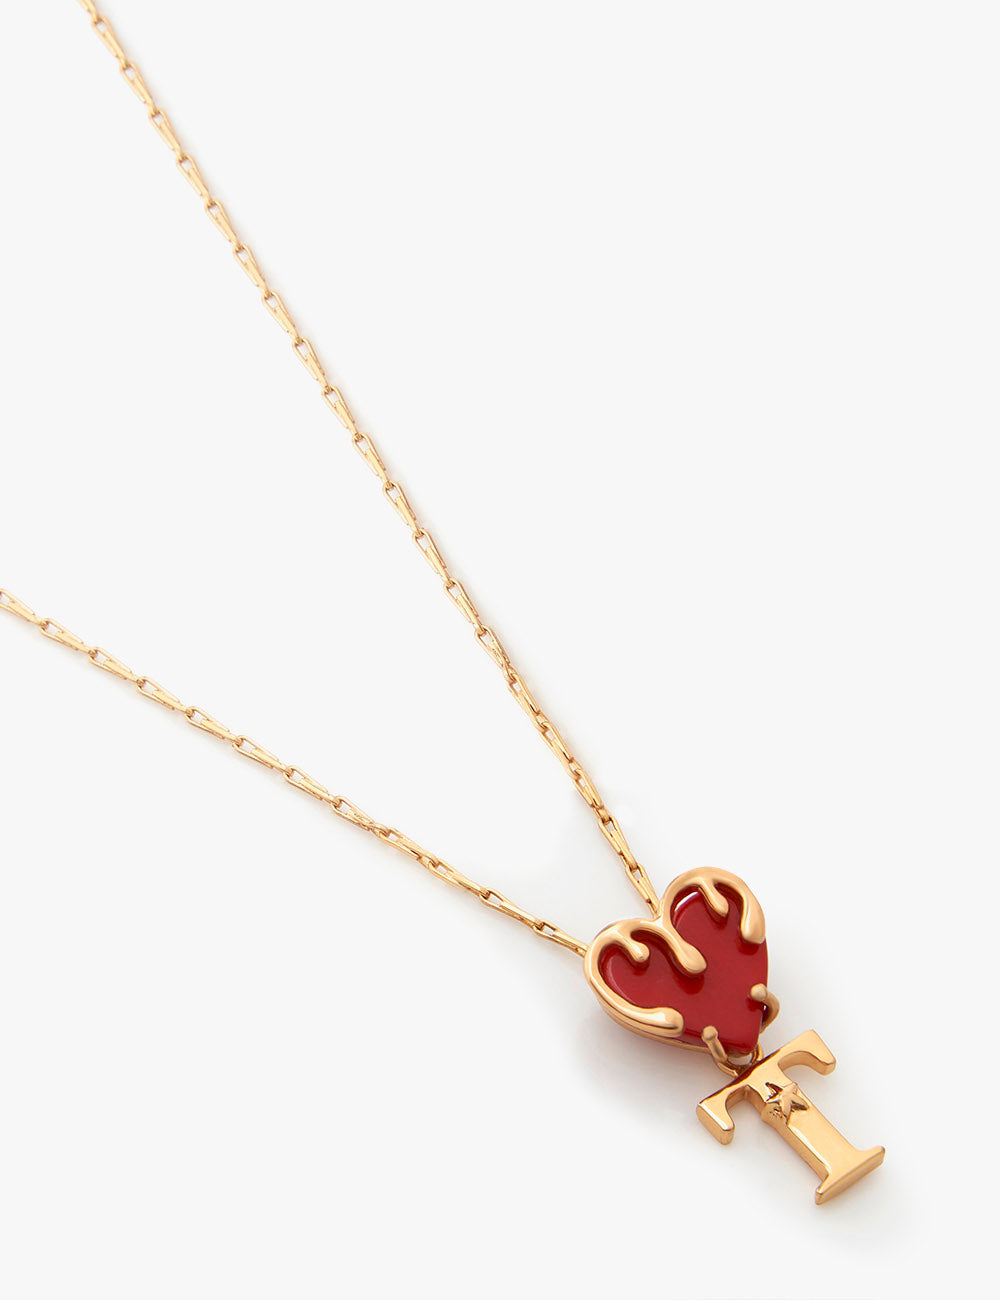 LOUIS VUITTON, a pir of 'Love letter' earrings and a necklace